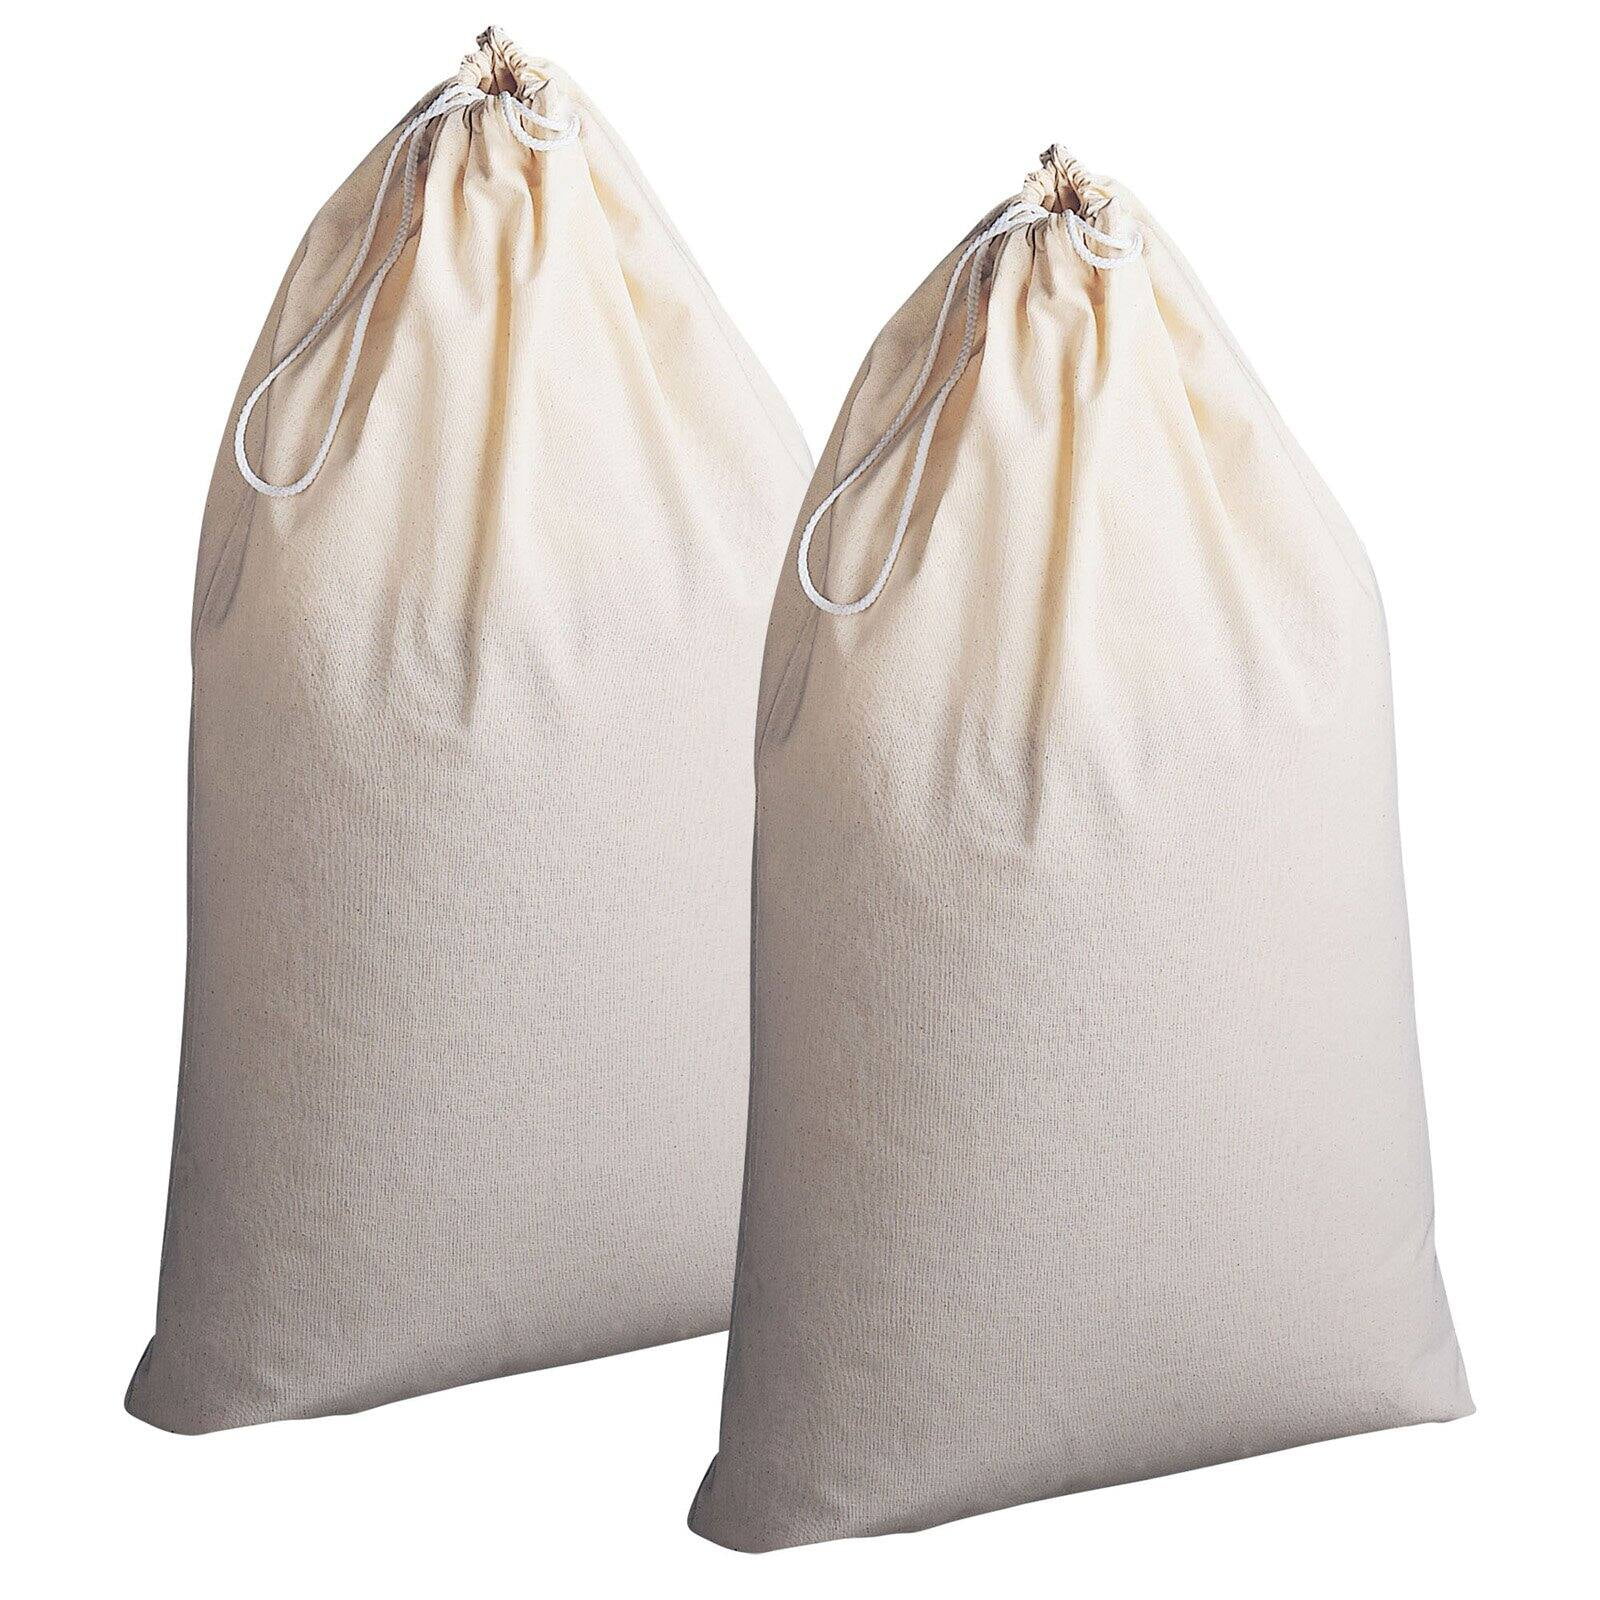 2 Pack Extra Large Natural Cotton Laundry Bag 28" x 36" Beige 